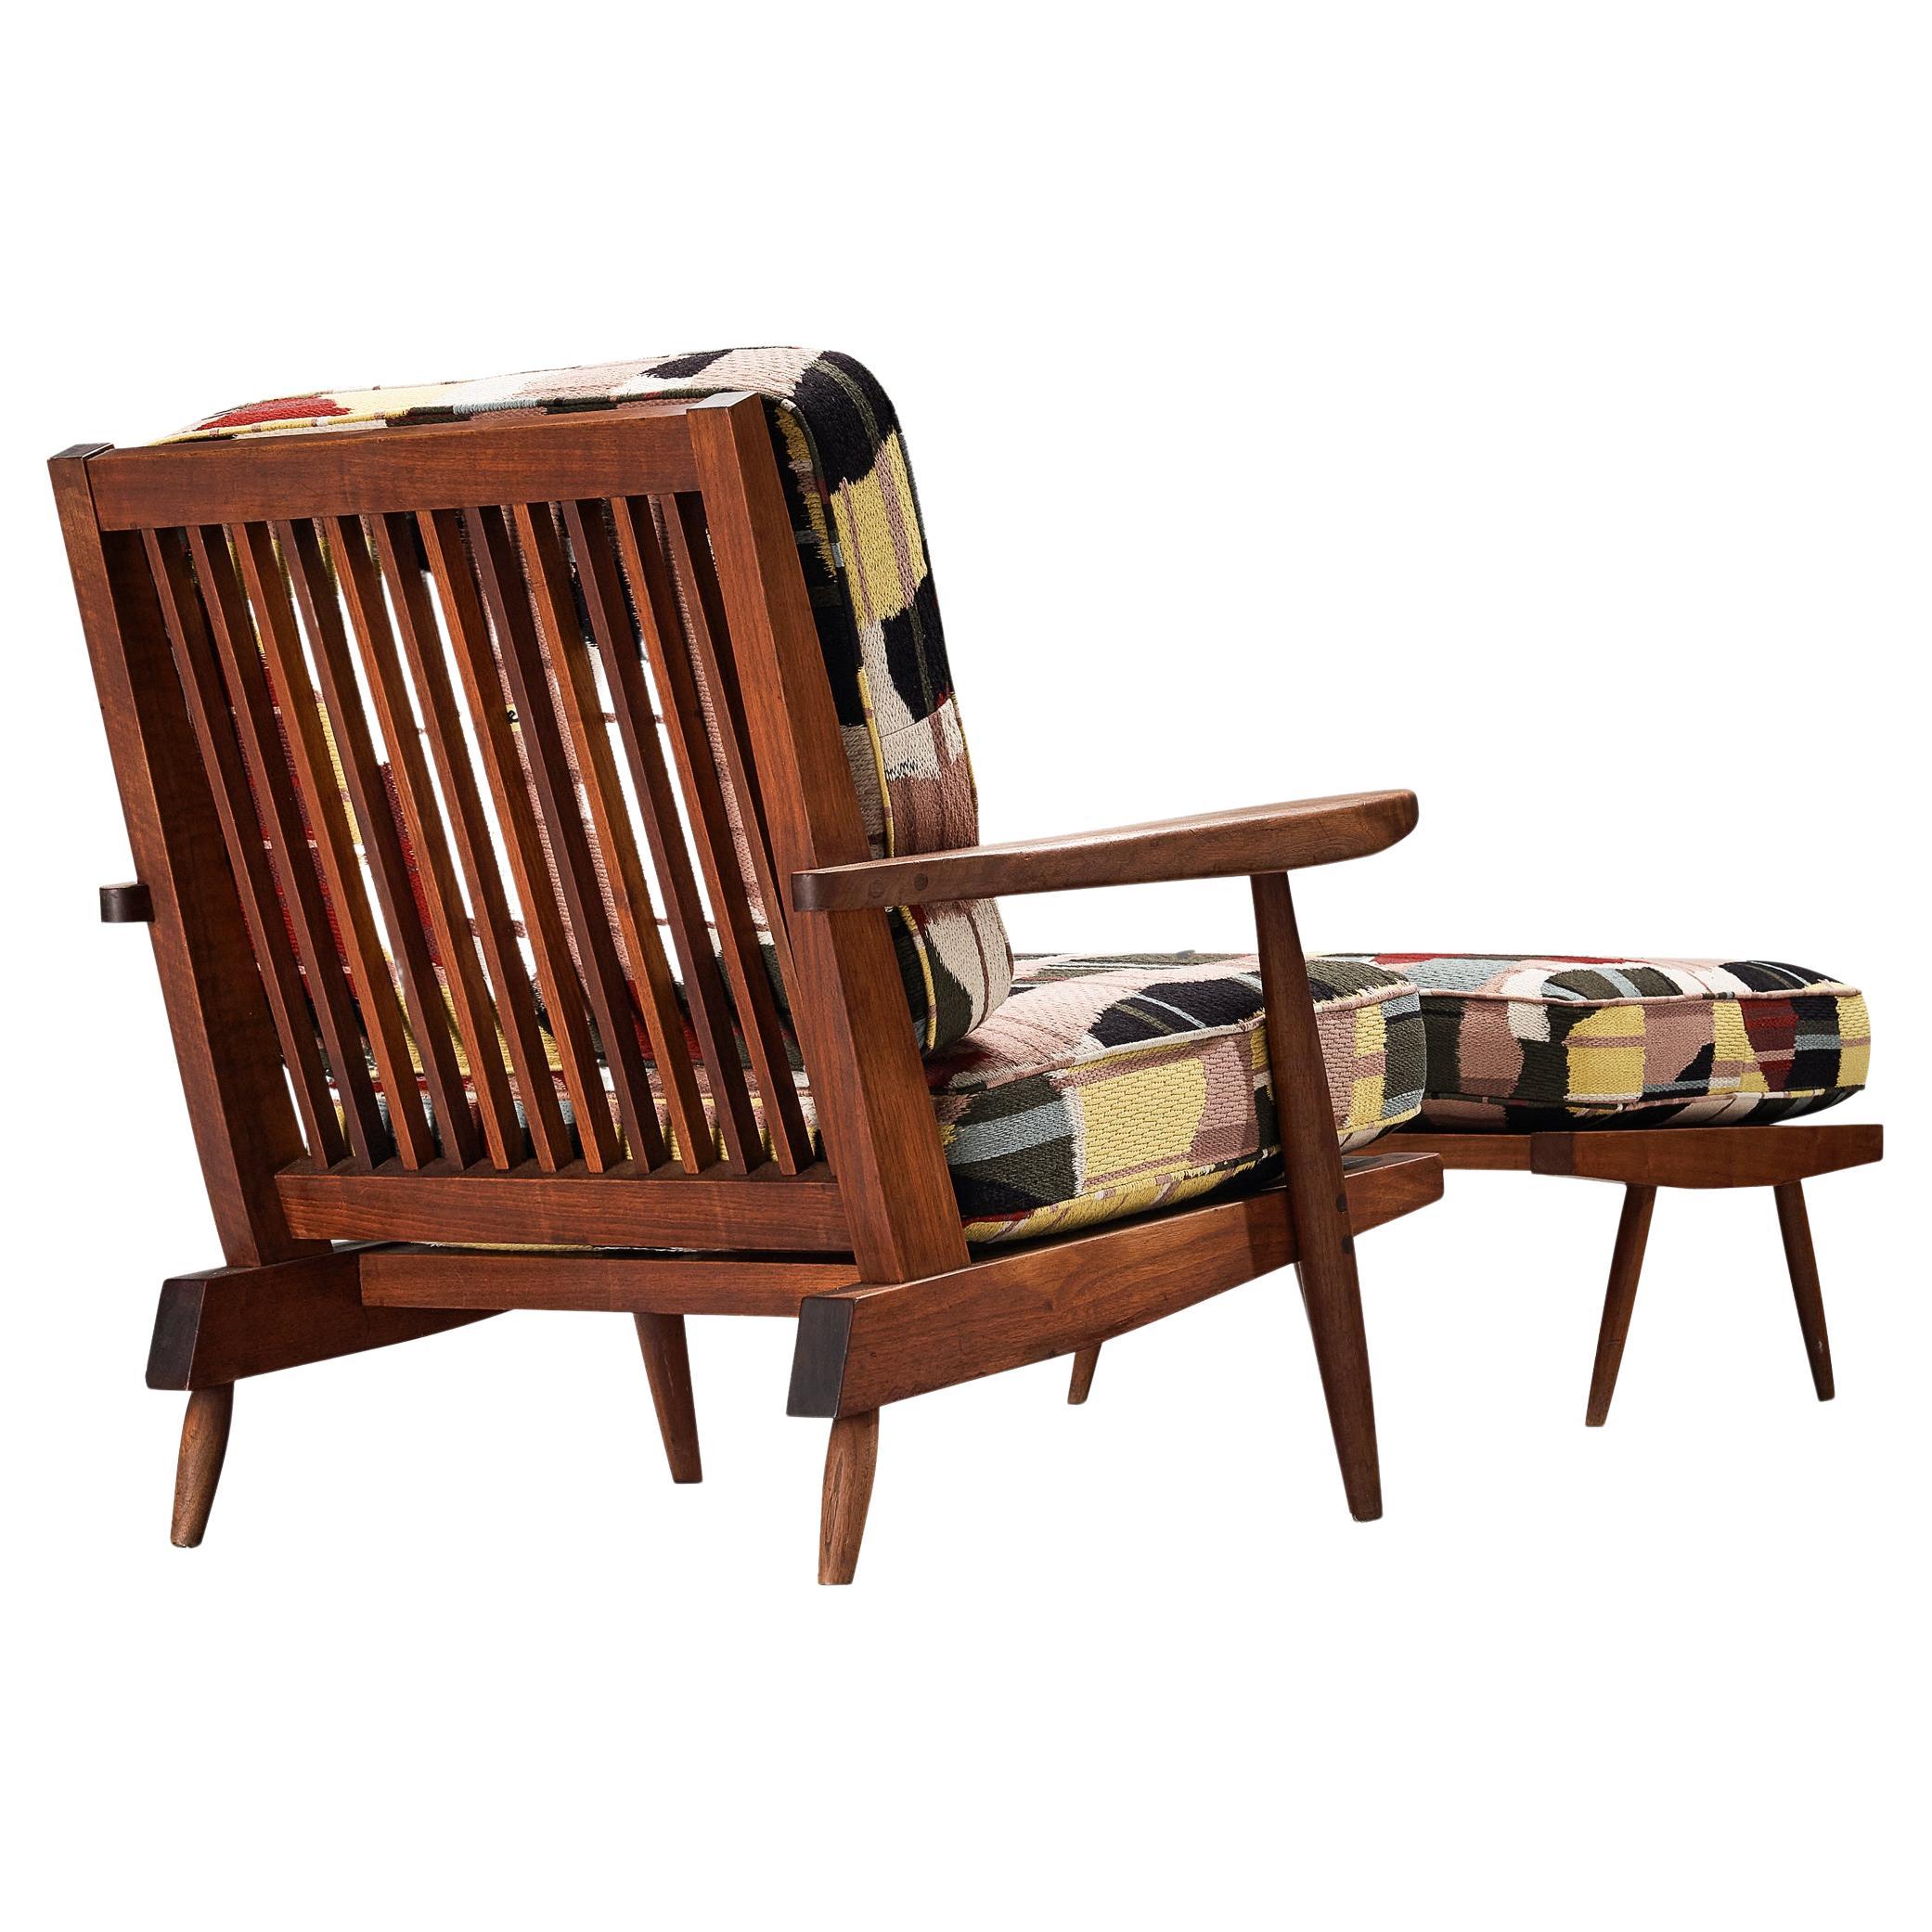 George Nakashima 'Cushion' Spindleback Lounge Chair and Ottoman in Walnut  For Sale